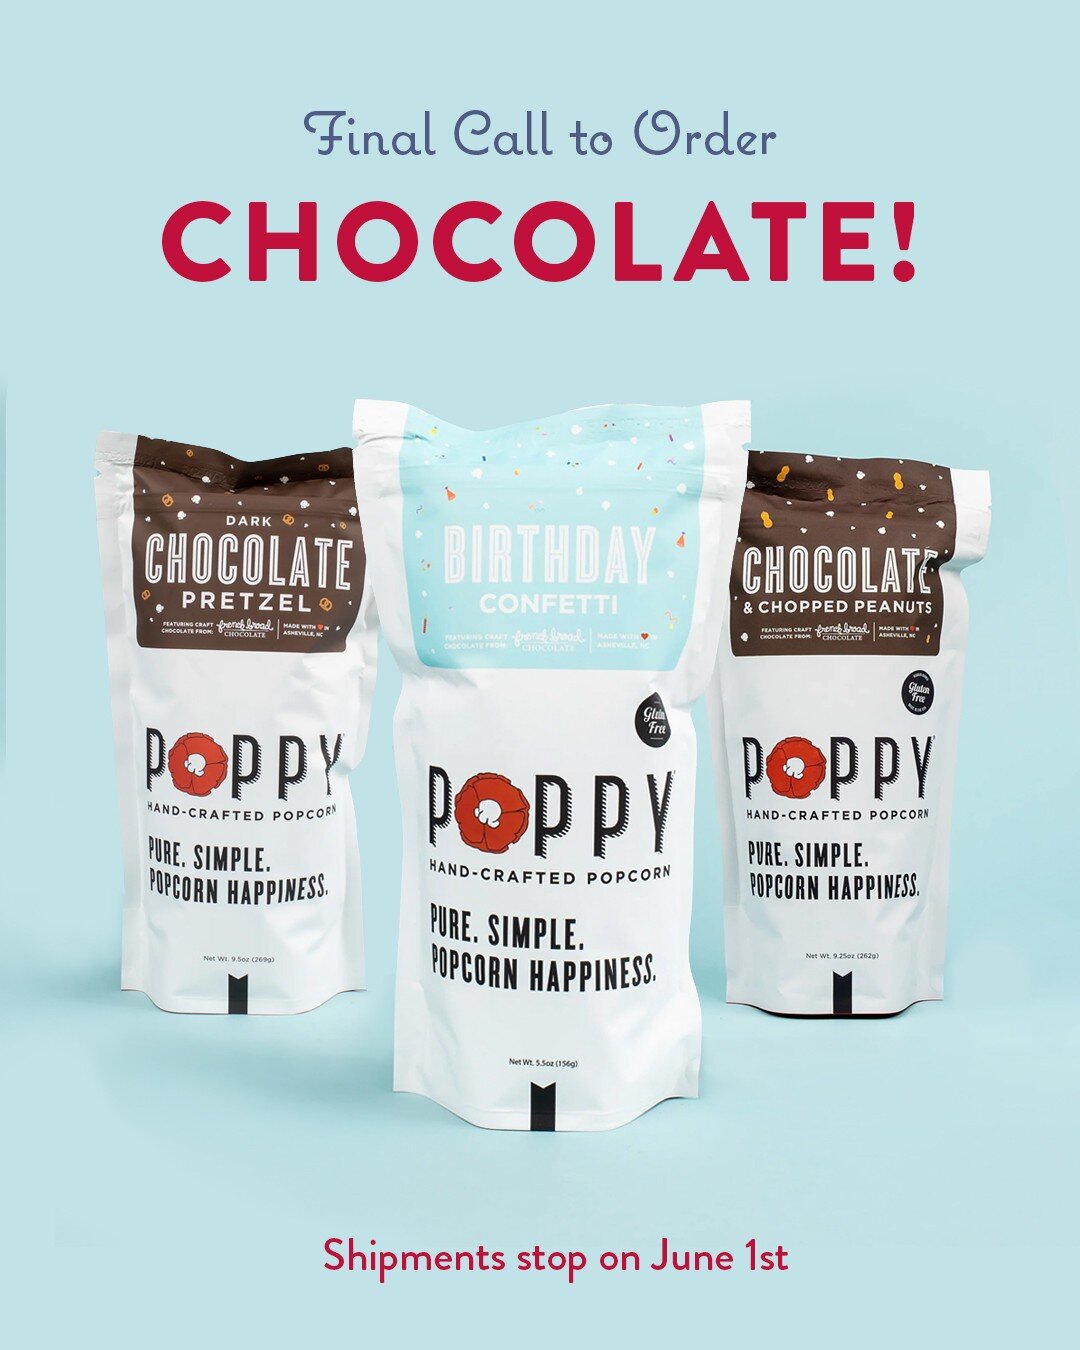 Stock up on your favorite chocolate flavors from @poppyhandcraftedpopcorn before they stop shipping on June 1st!🍫

Contact your local rep or shop Poppy at danrichgroup.com/shop-online.

#popcornhappiness #poppyhandcraftedpopcorn #popcornlover #summe